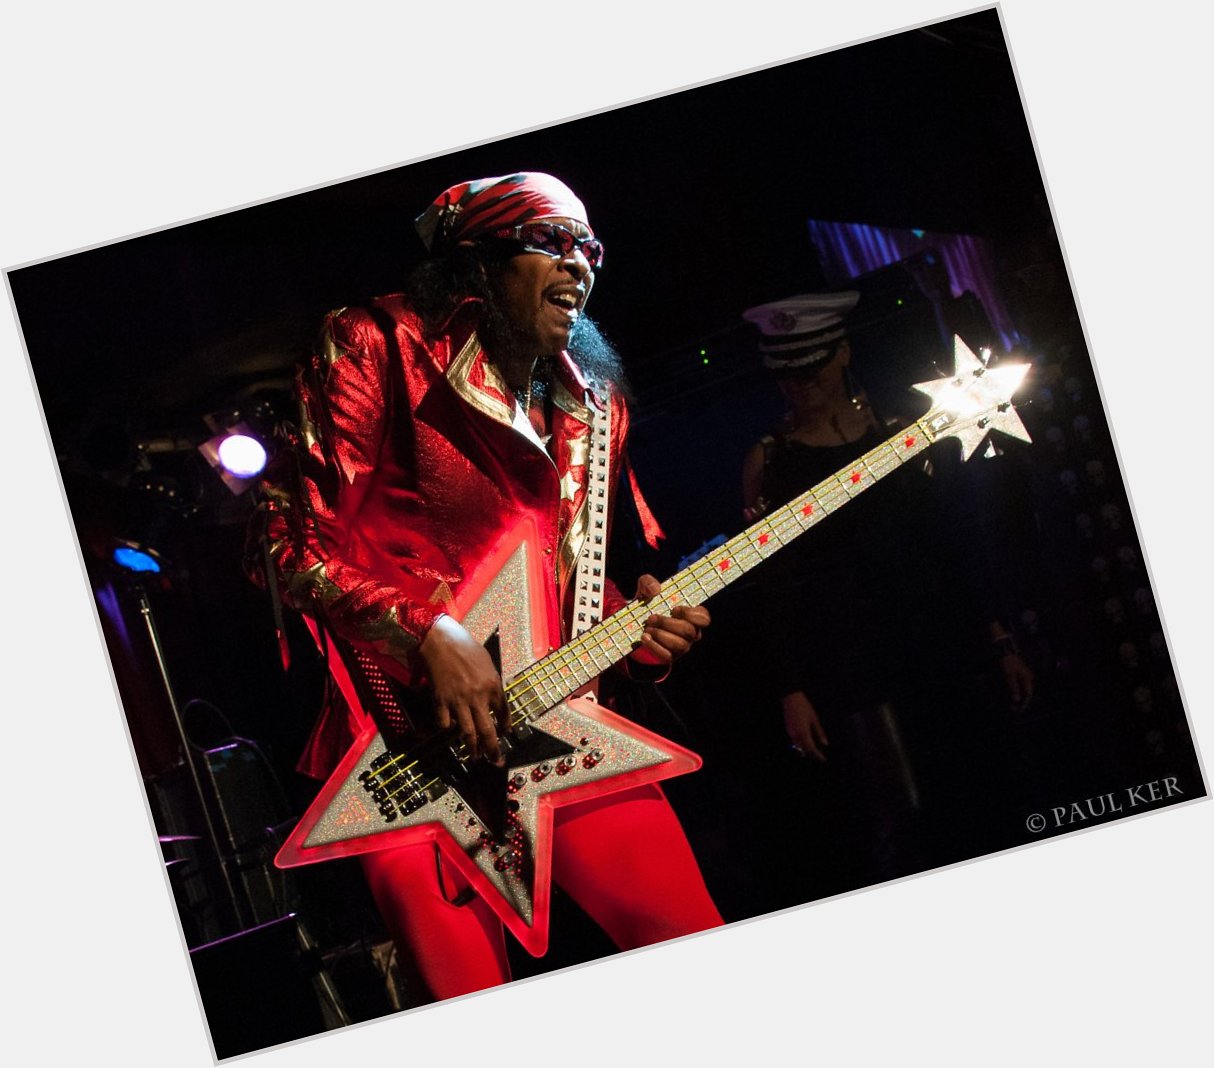 Happy Birthday to Bootsy Collins, who turns 64 today! 